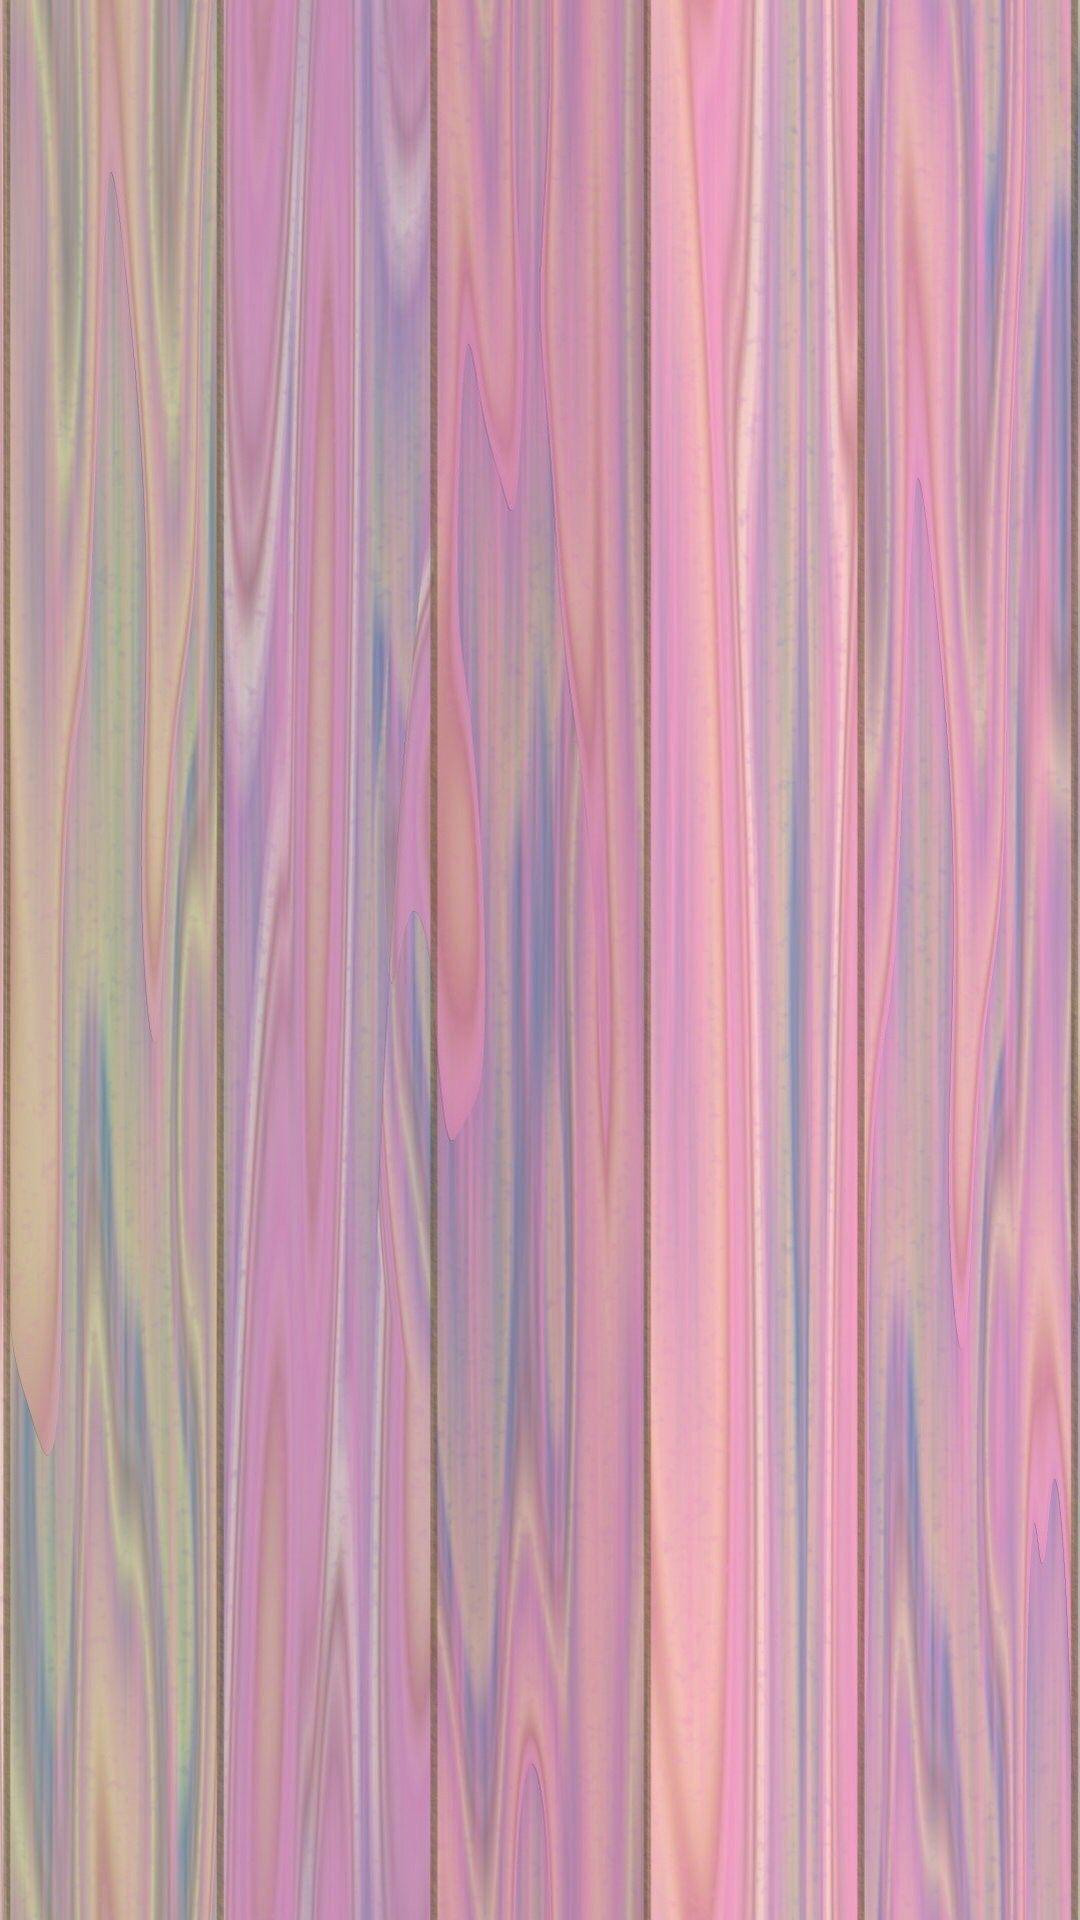 iPhone Wood Wallpaper HD from Uploaded by user. Wood